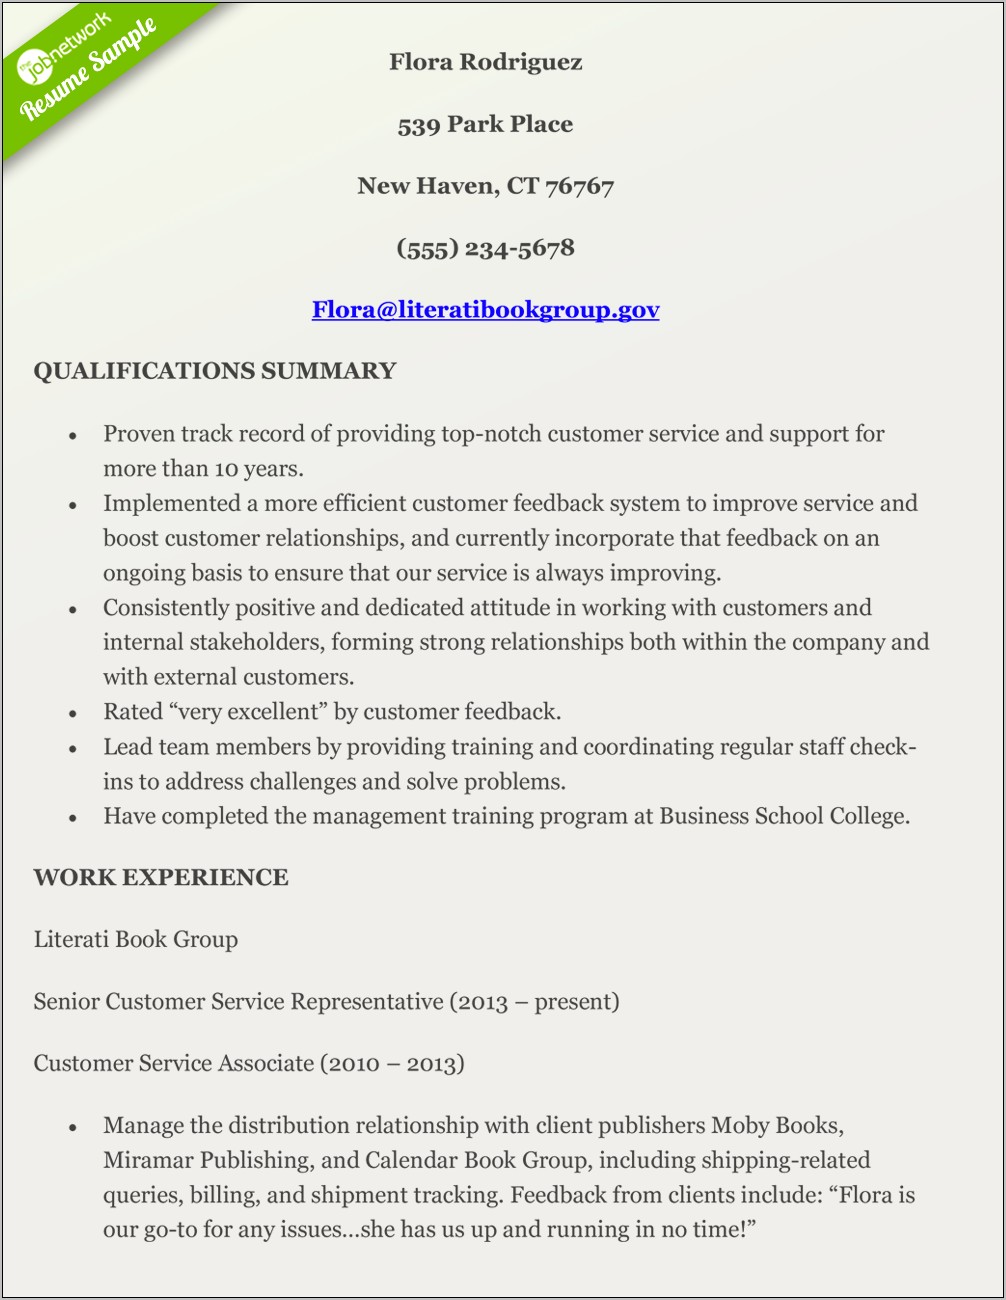 Public Relations Resume Examples For Entry Level